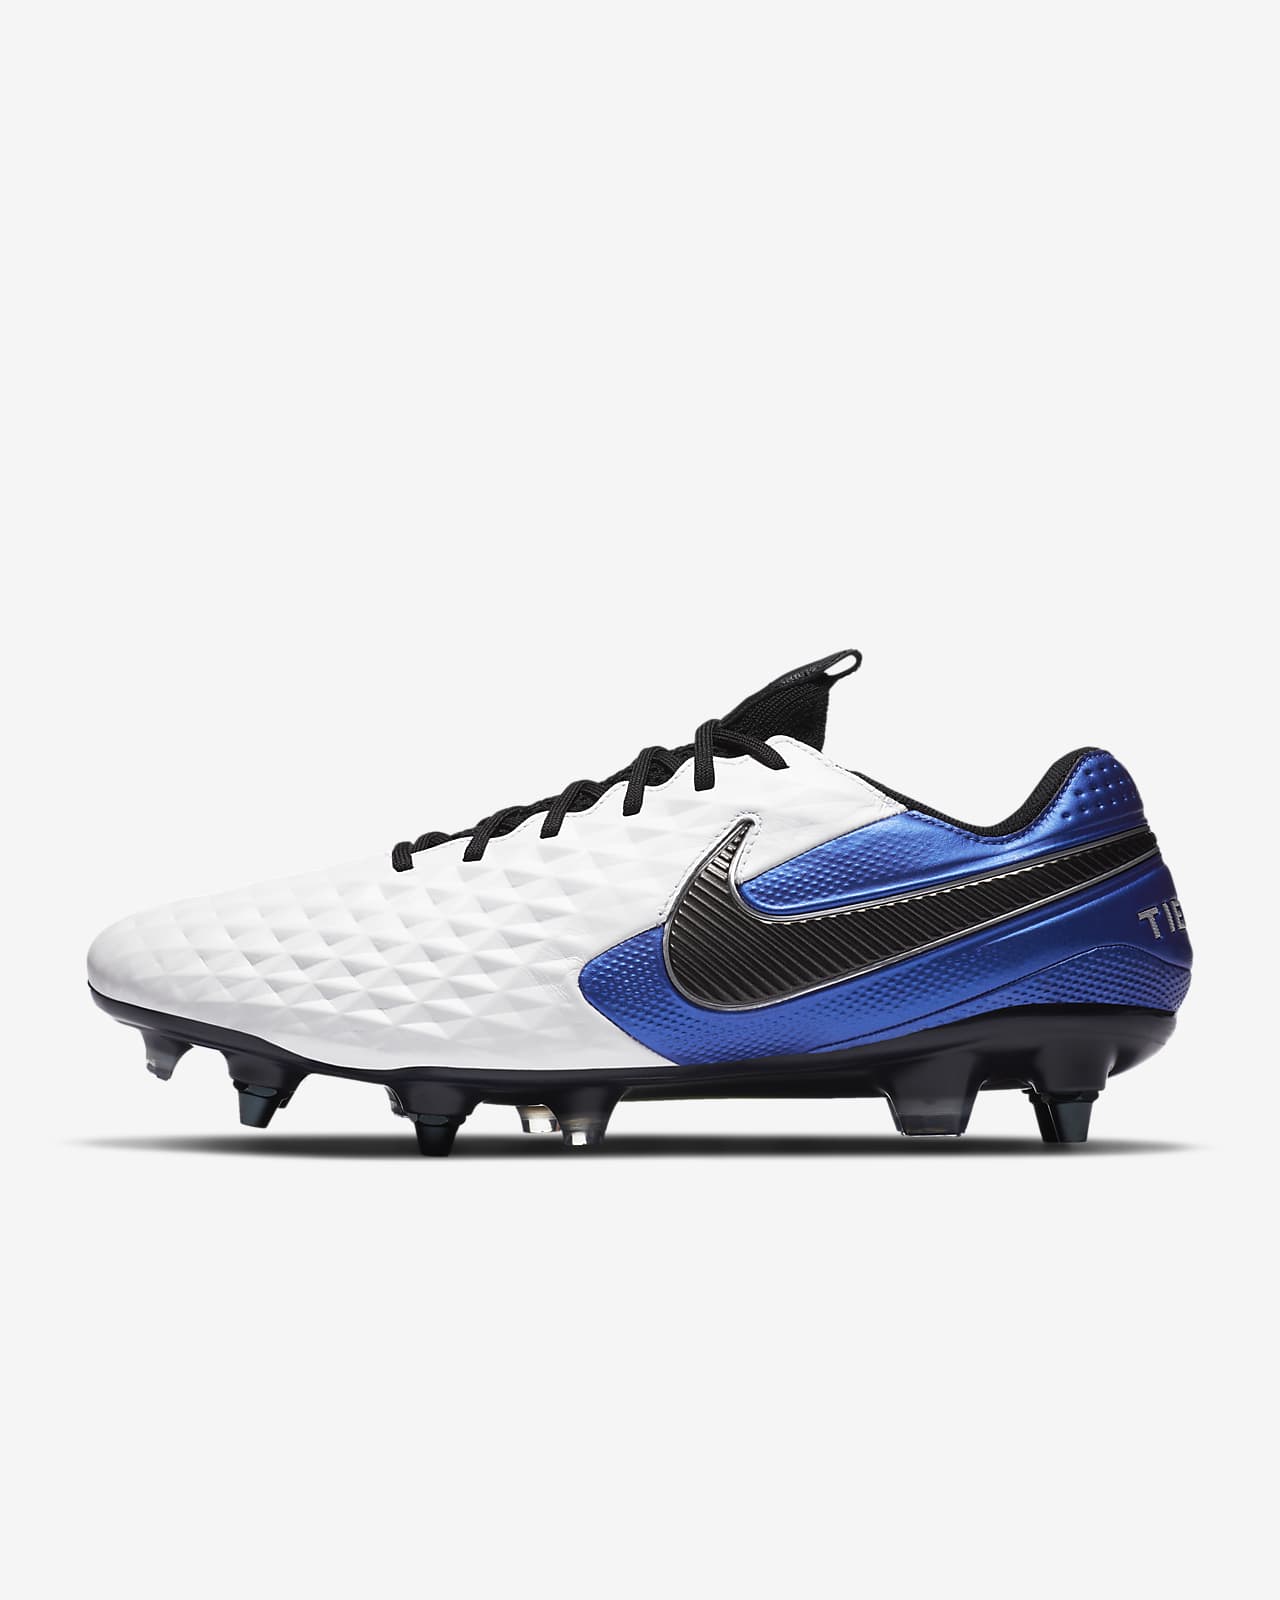 nike sg pro boots